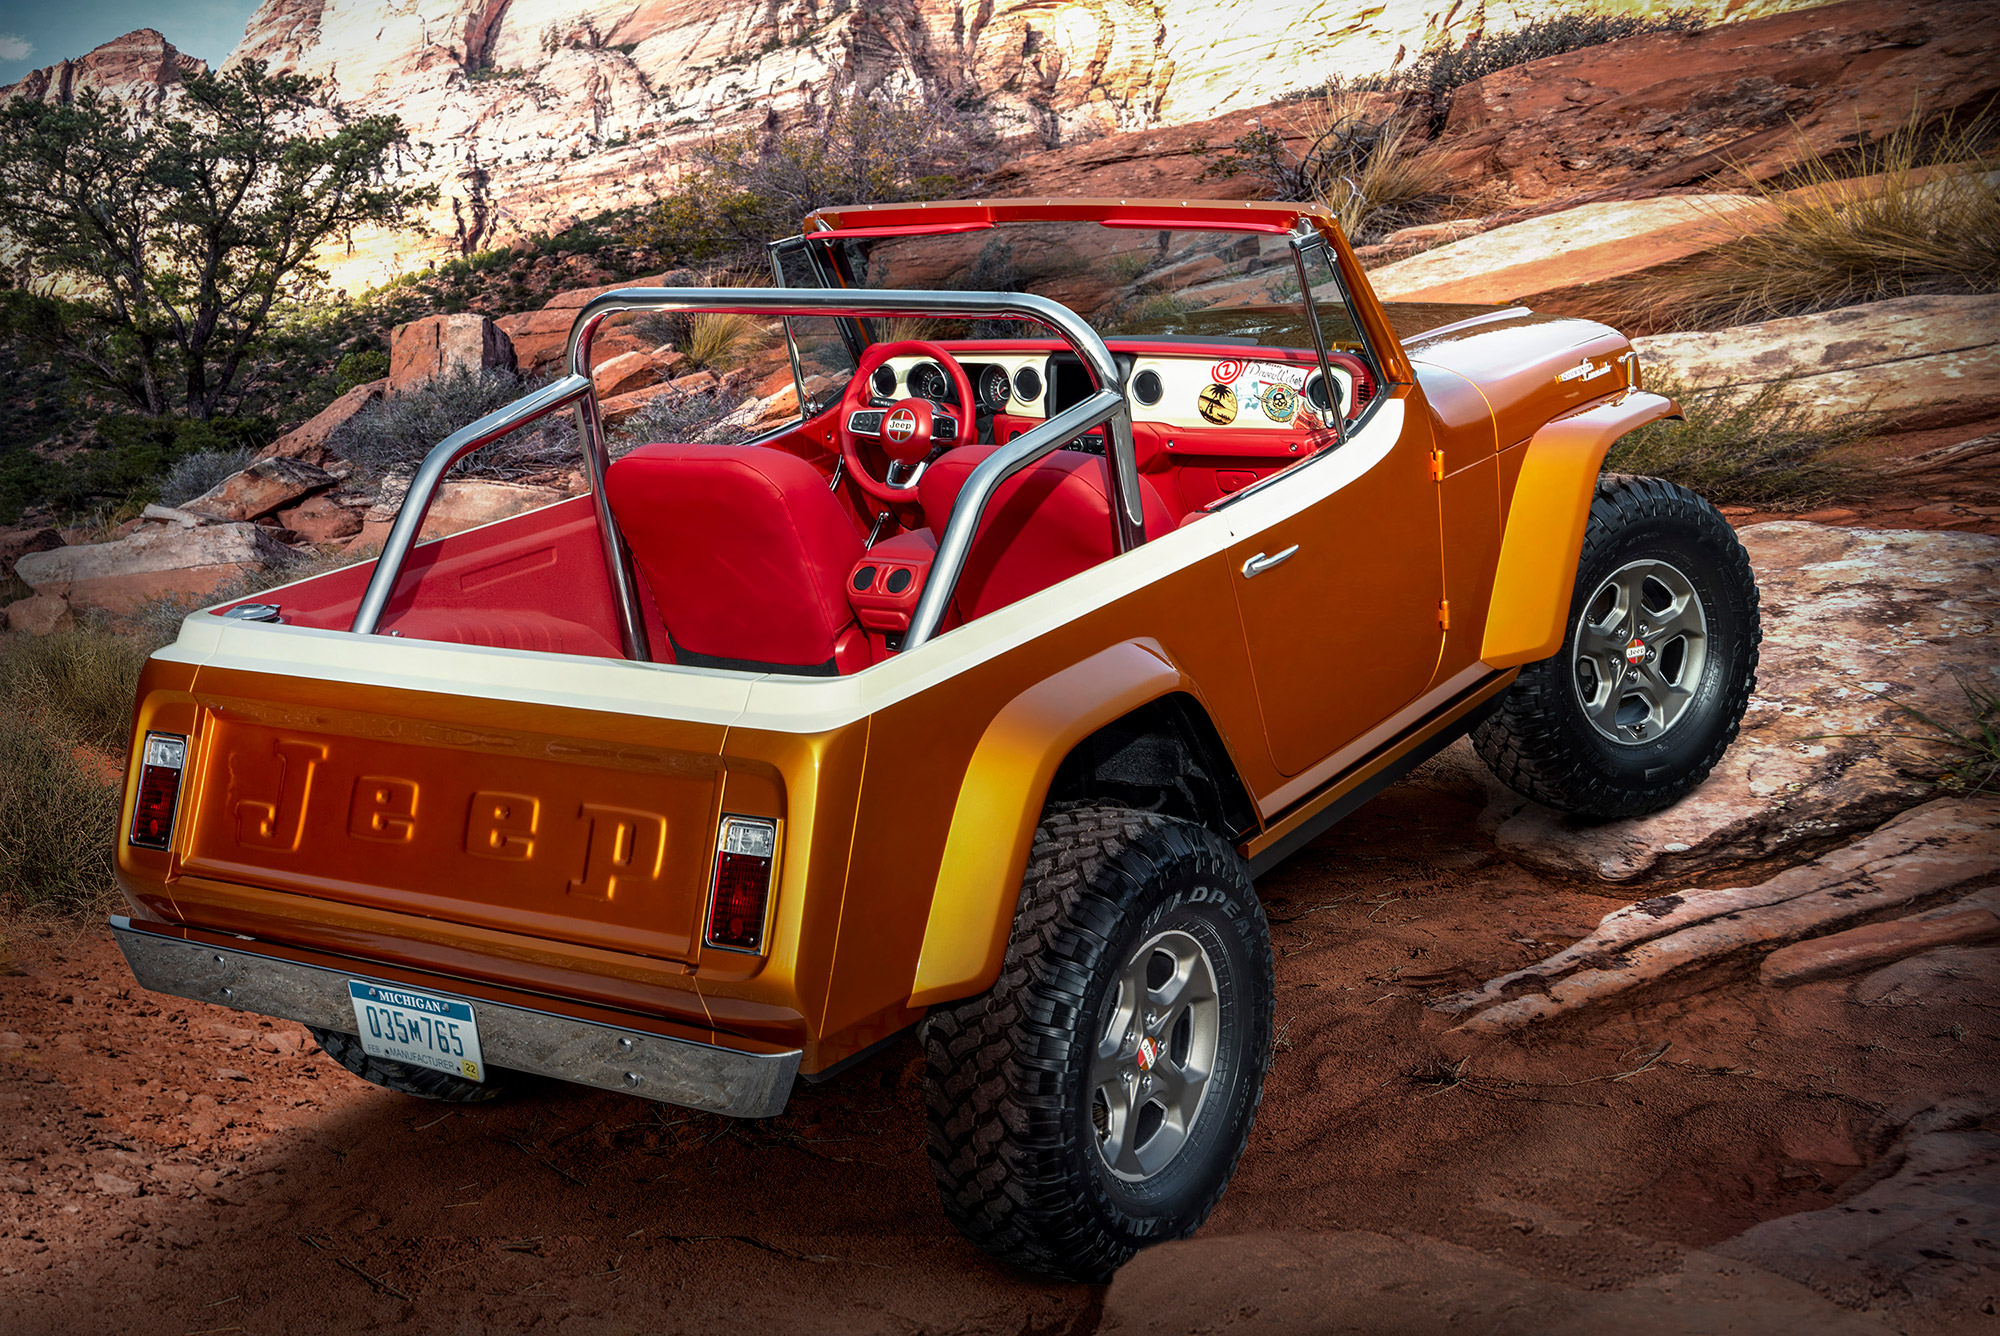 Jeepster Beach Concept Is What Happens When You Stuff A New Wrangler In A 53-Year-Old Shell